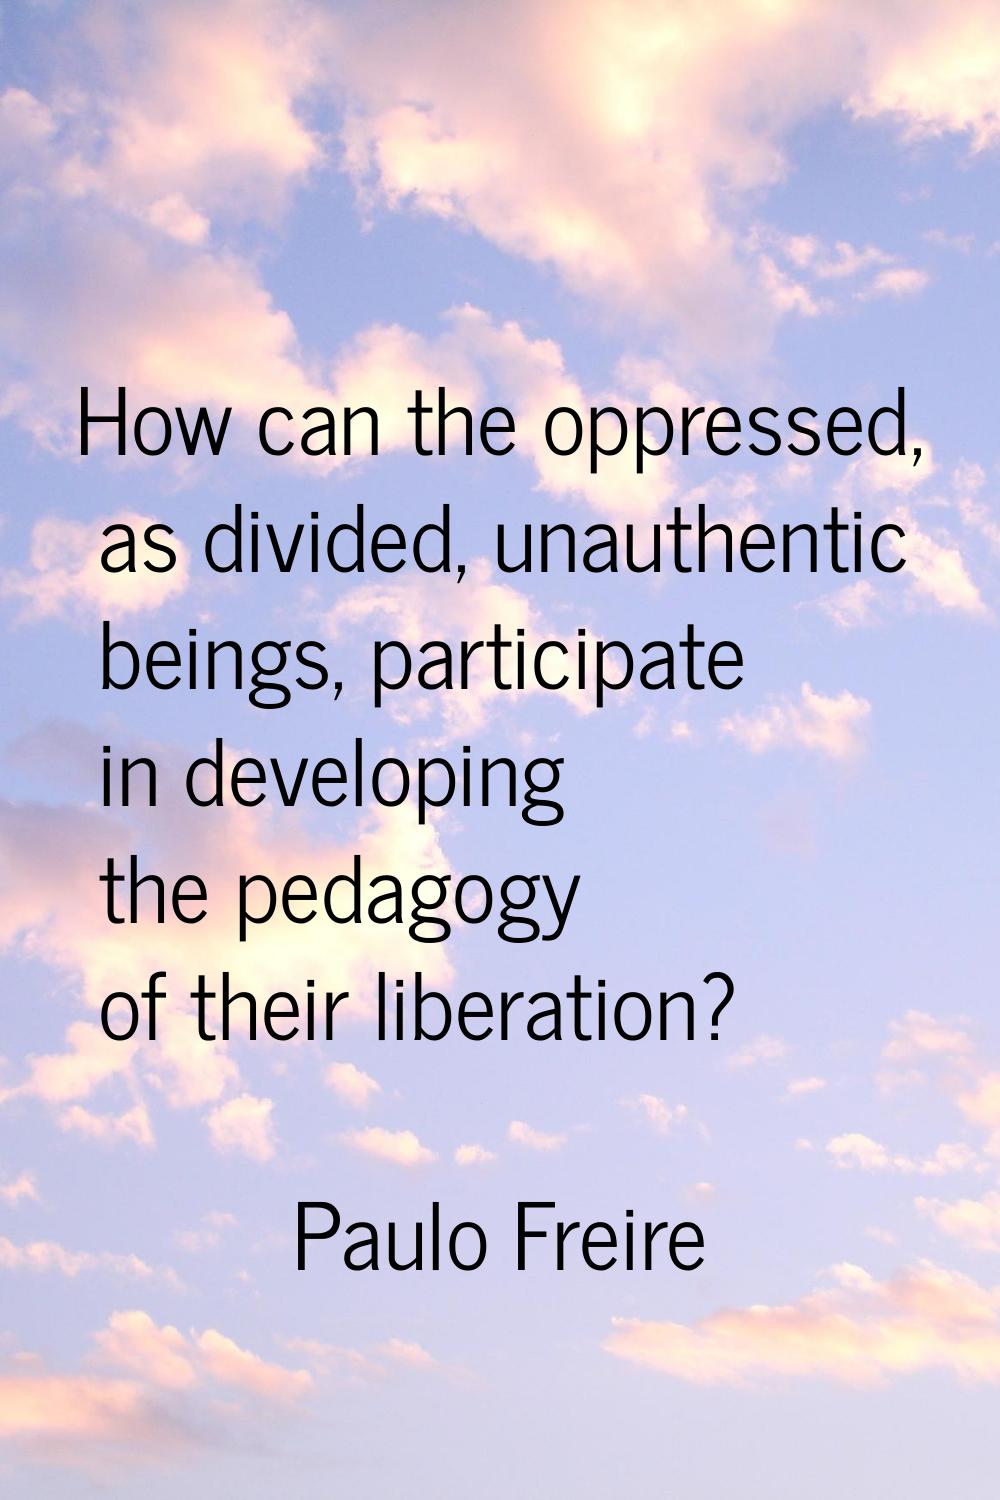 How can the oppressed, as divided, unauthentic beings, participate in developing the pedagogy of th